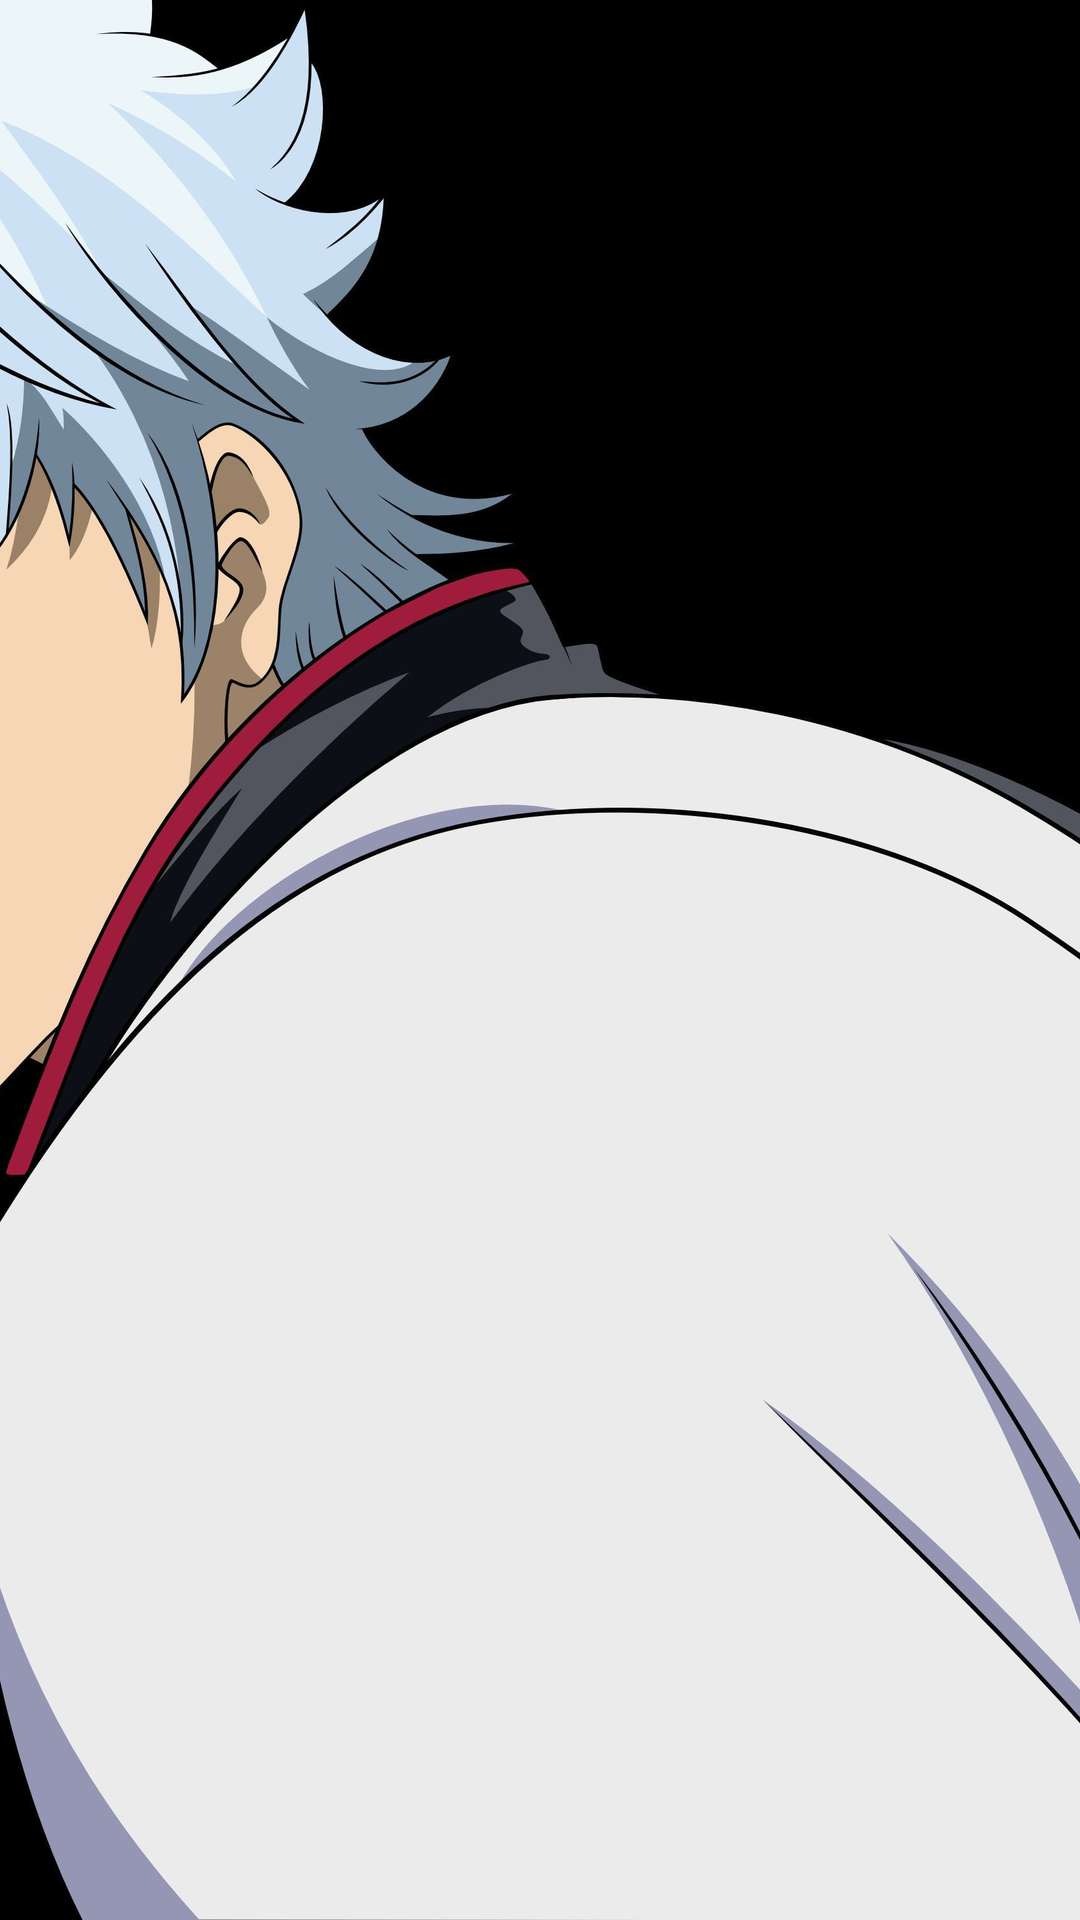 Do you have no. 1 favourite anime MC (if you can choose 1)? Mine is Sakata  Gintoki from Gintama ^^ - Quora